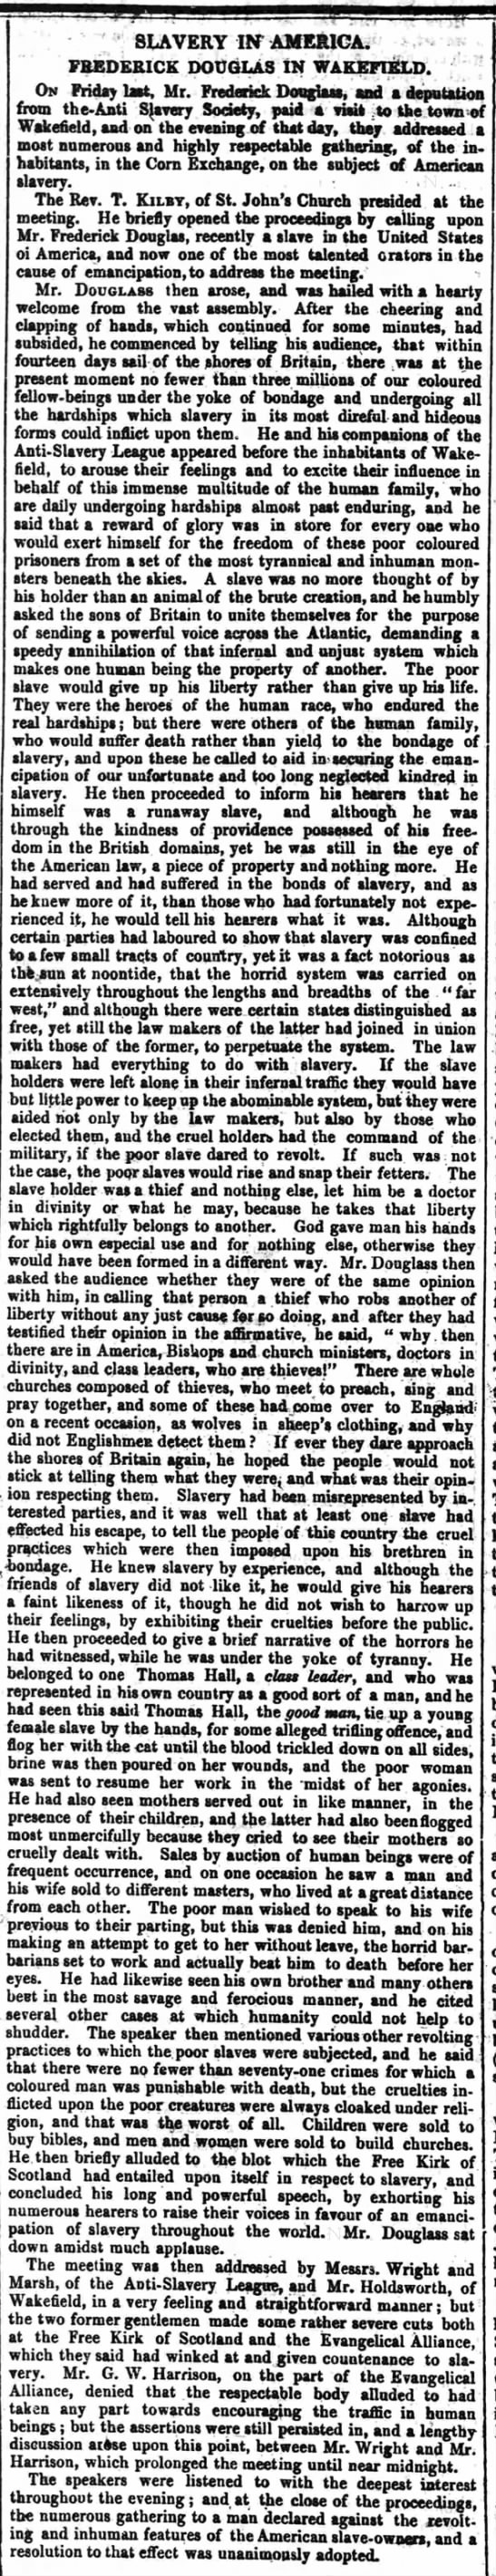 Summary of an anti-slavery speech given by Frederick Douglass in England in 1847 - 